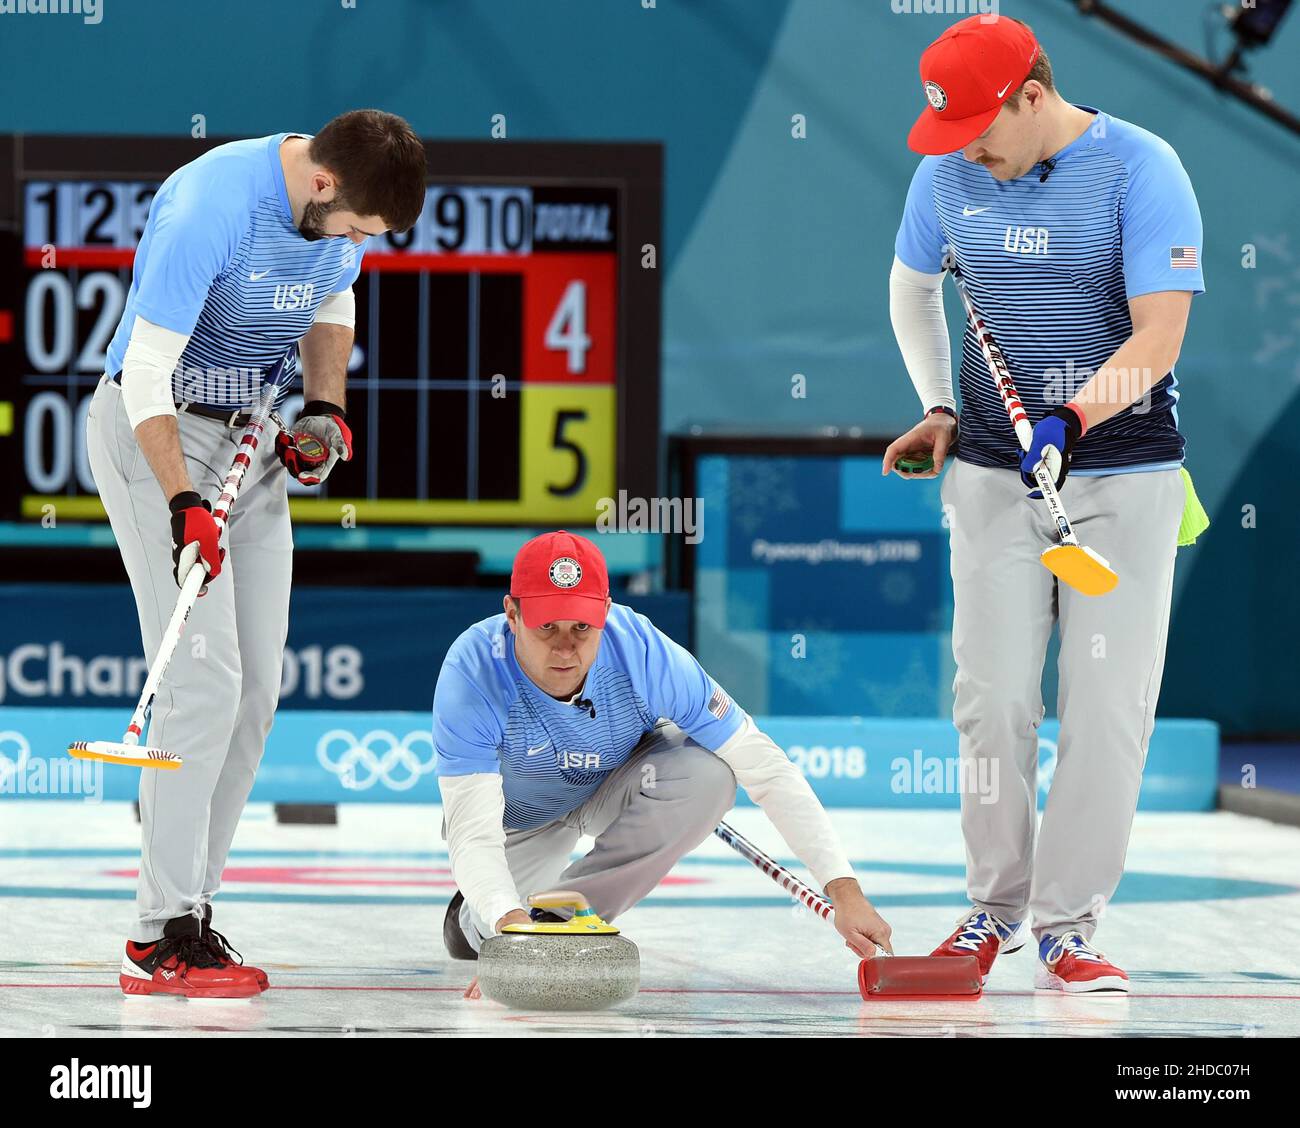 John shuster curling 2018 hi-res stock photography and images